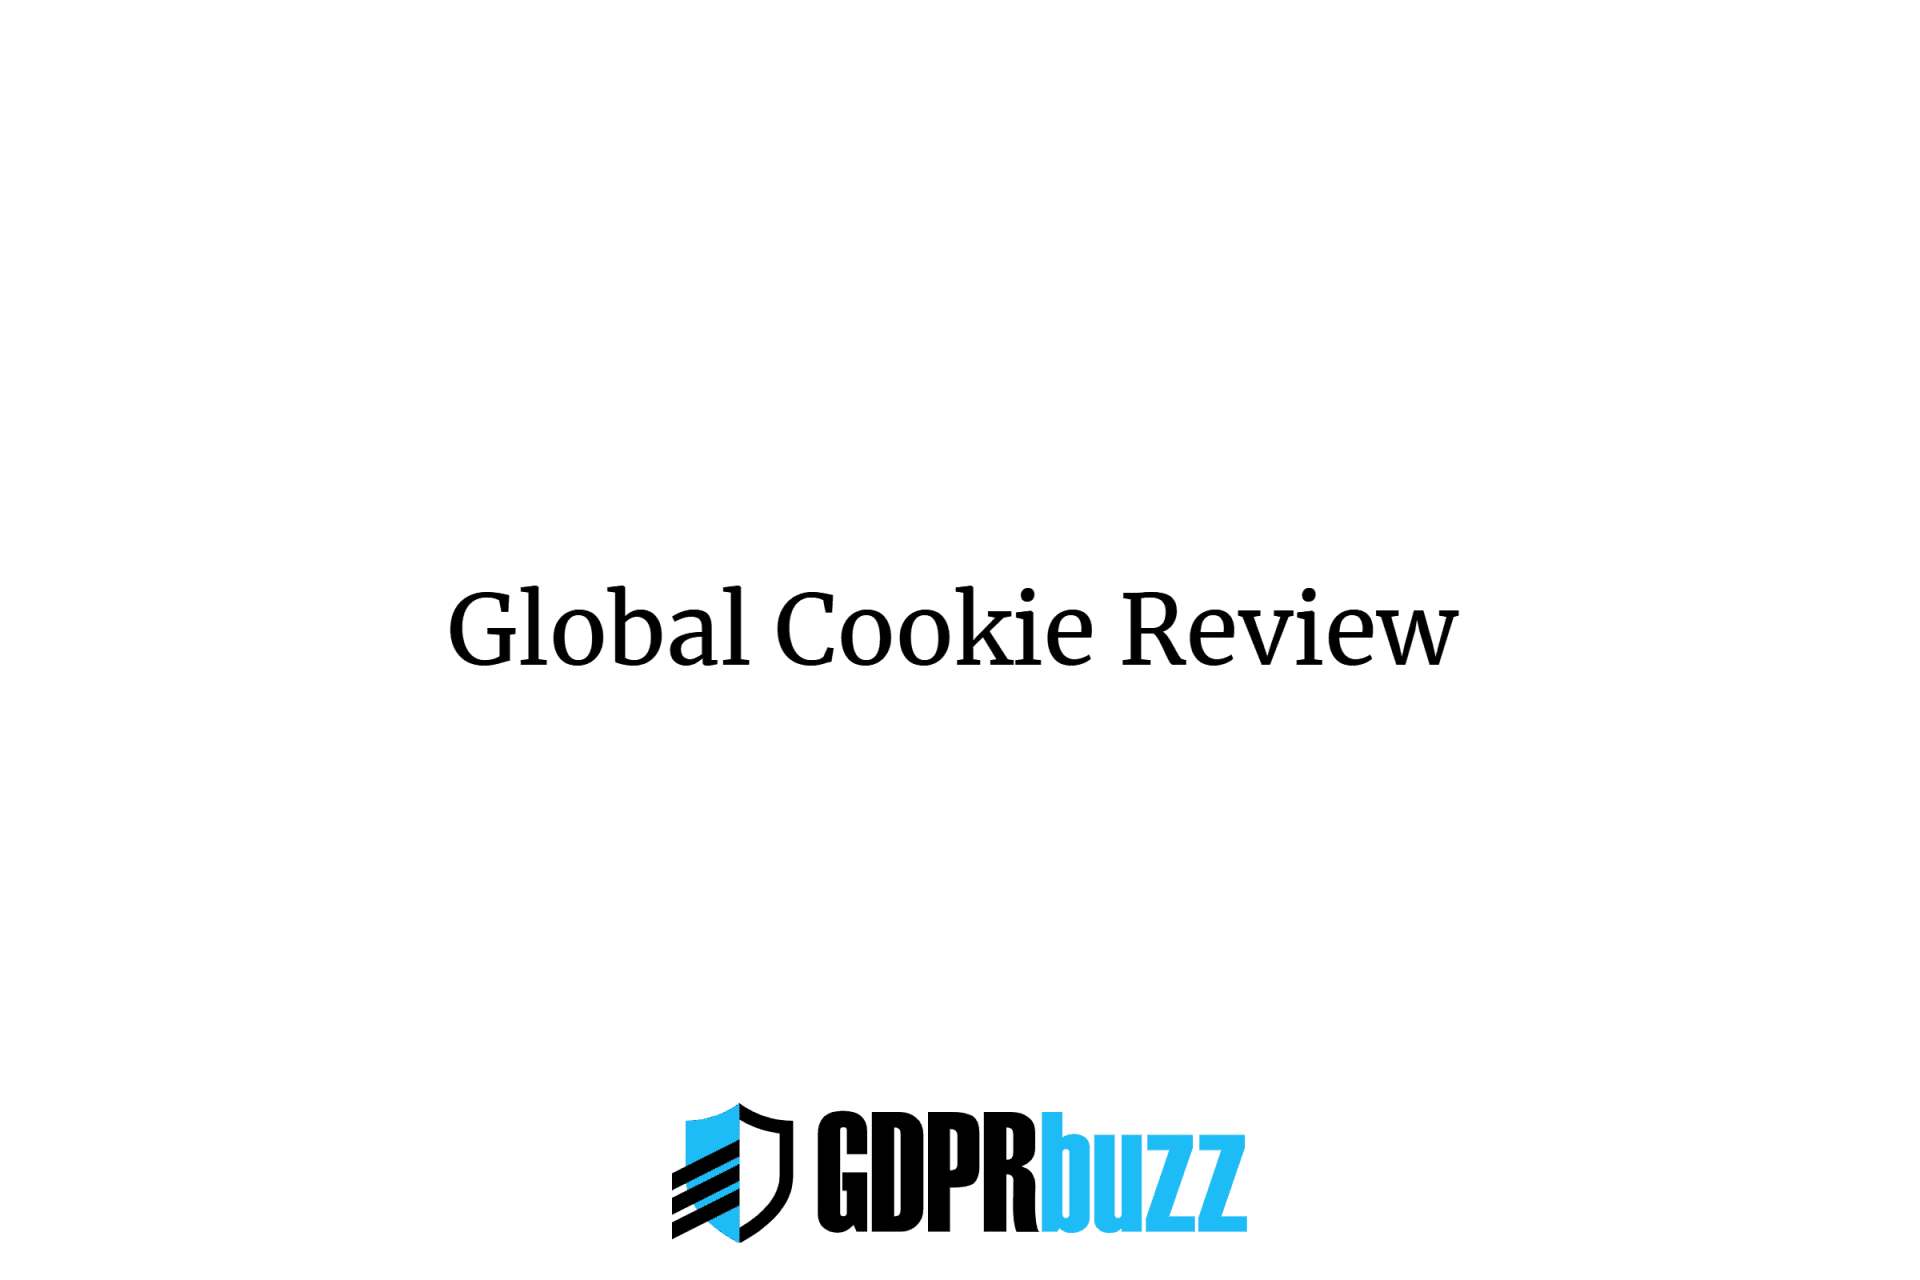 Global cookie review